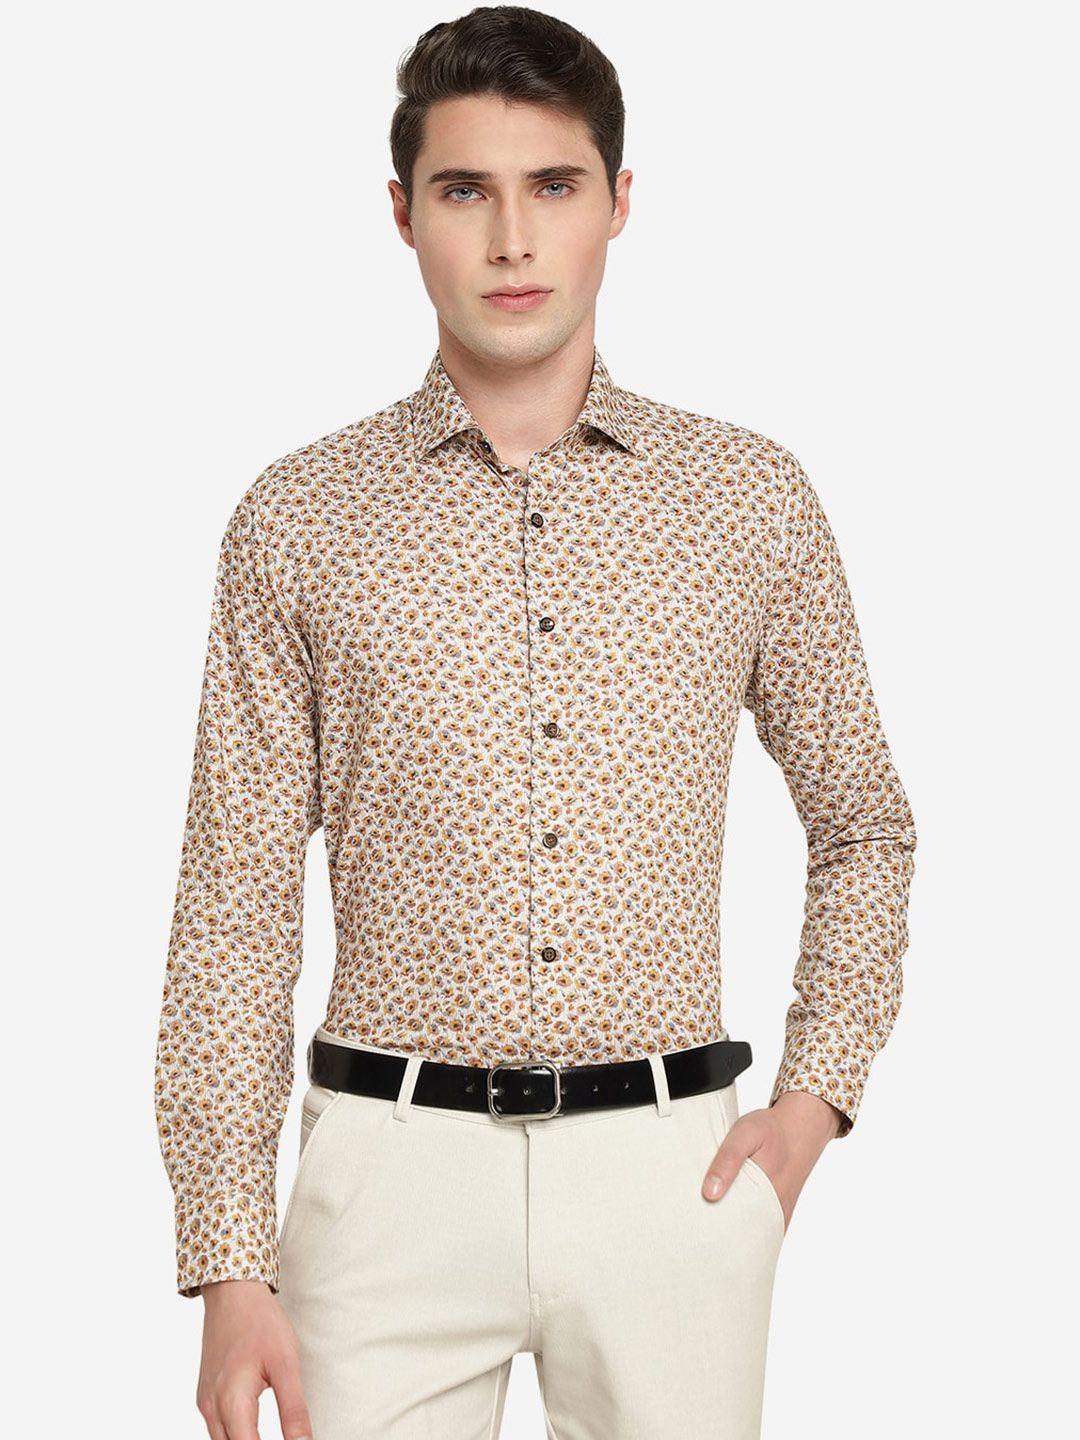 jb-studio-floral-printed-long-sleeves-slim-fit-pure-cotton-party-shirt